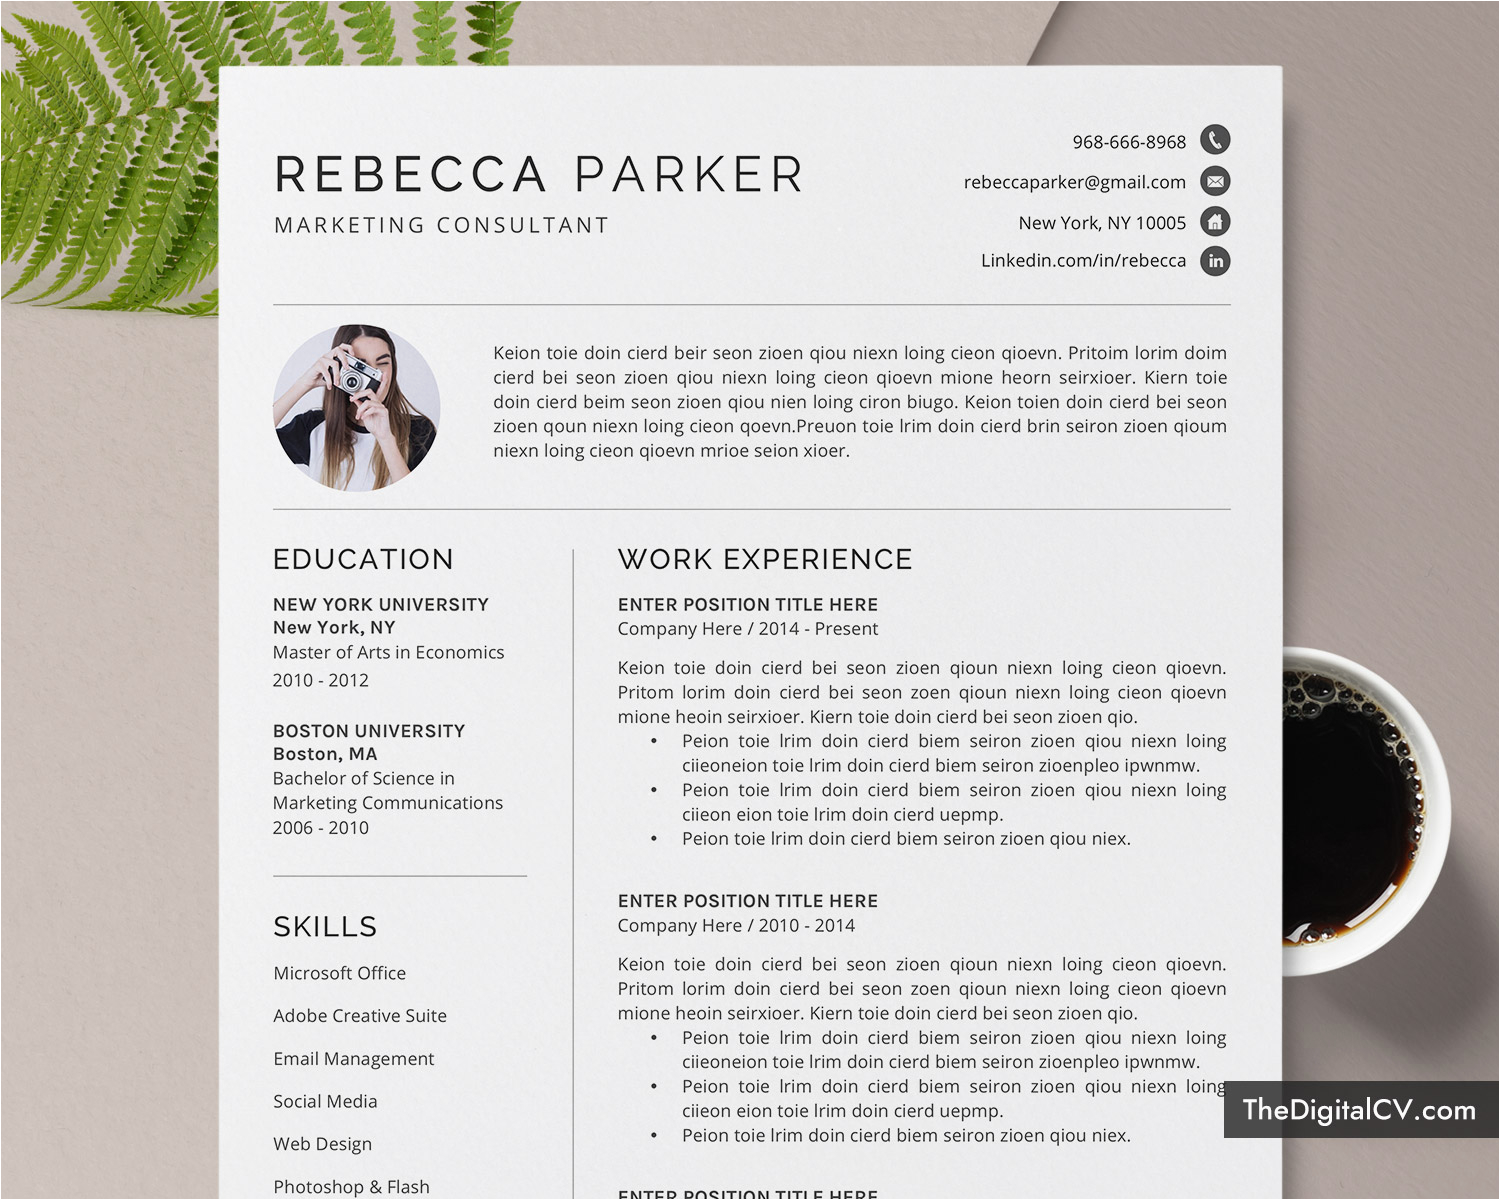 Professional Resume Templates 2022 Free Download Professional Resume Cv Template Word Free Download 2020